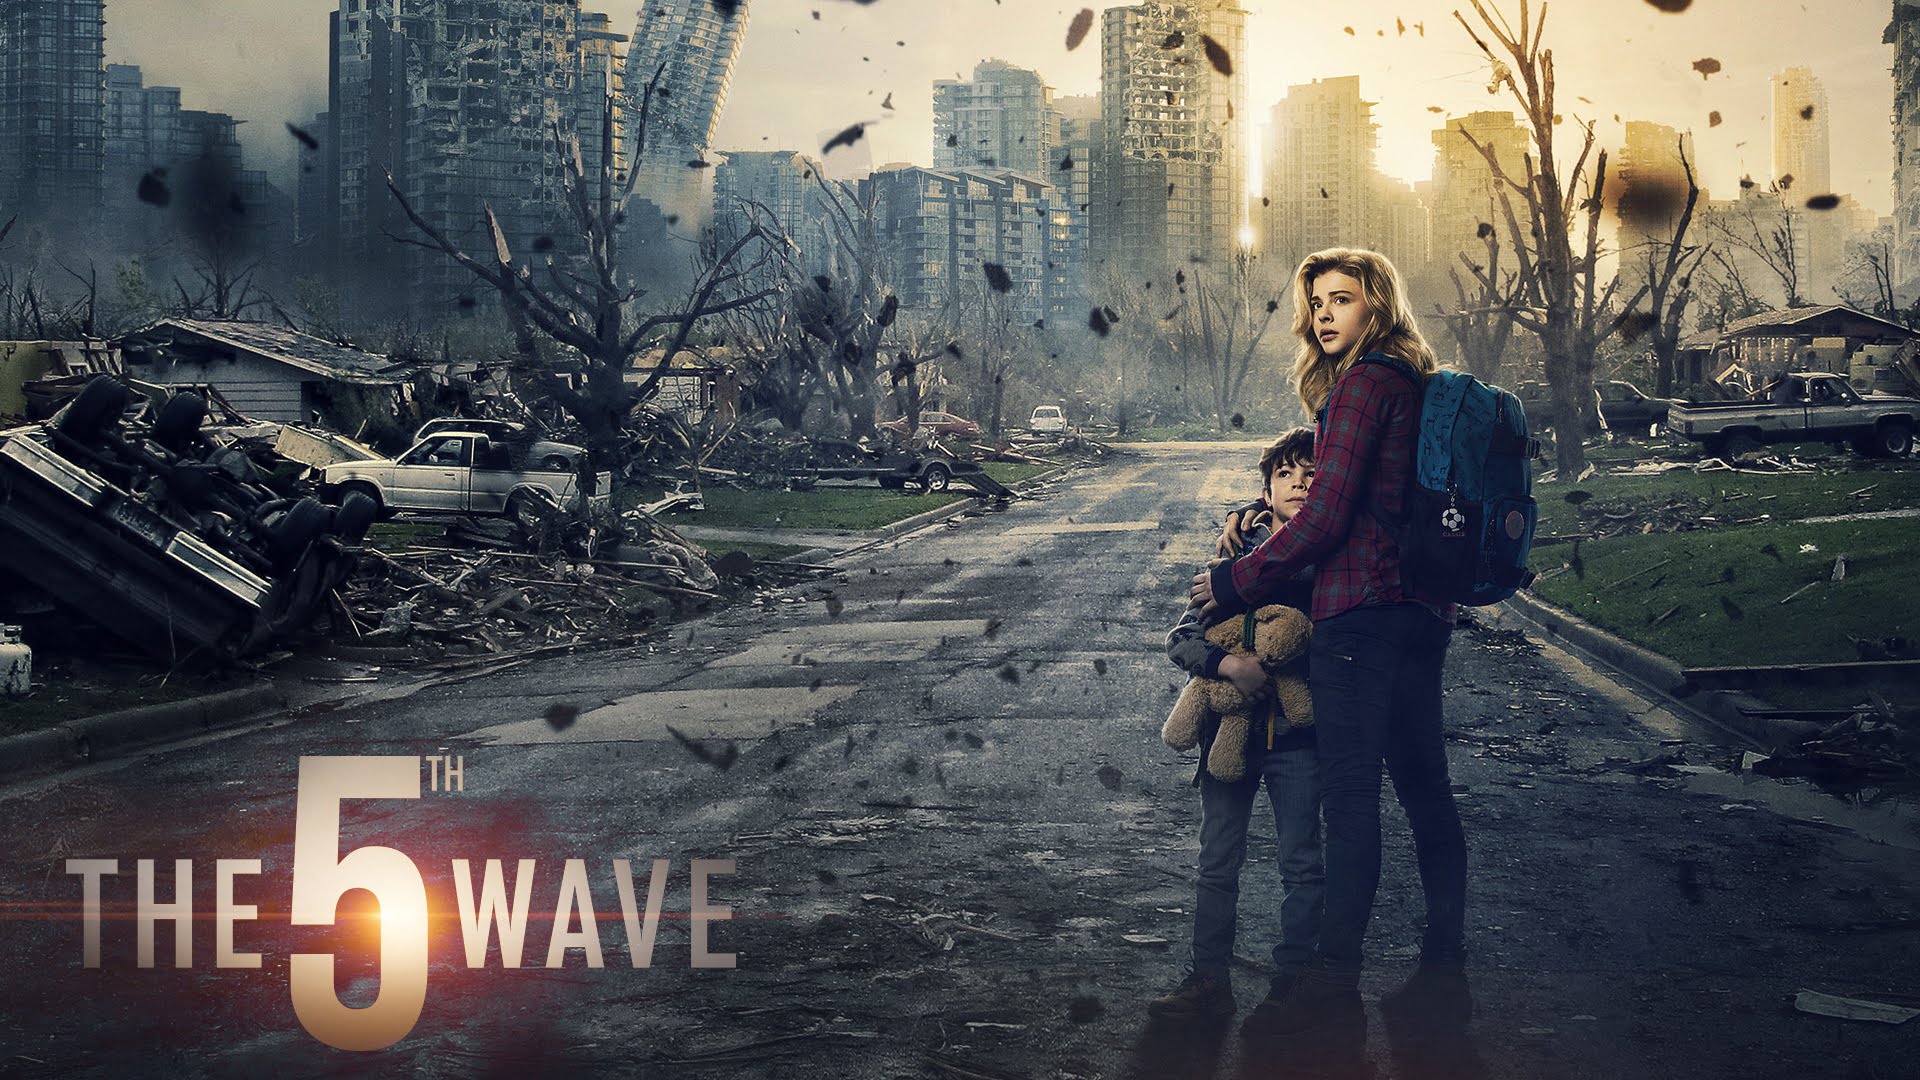 Amazing The 5th Wave Pictures & Backgrounds